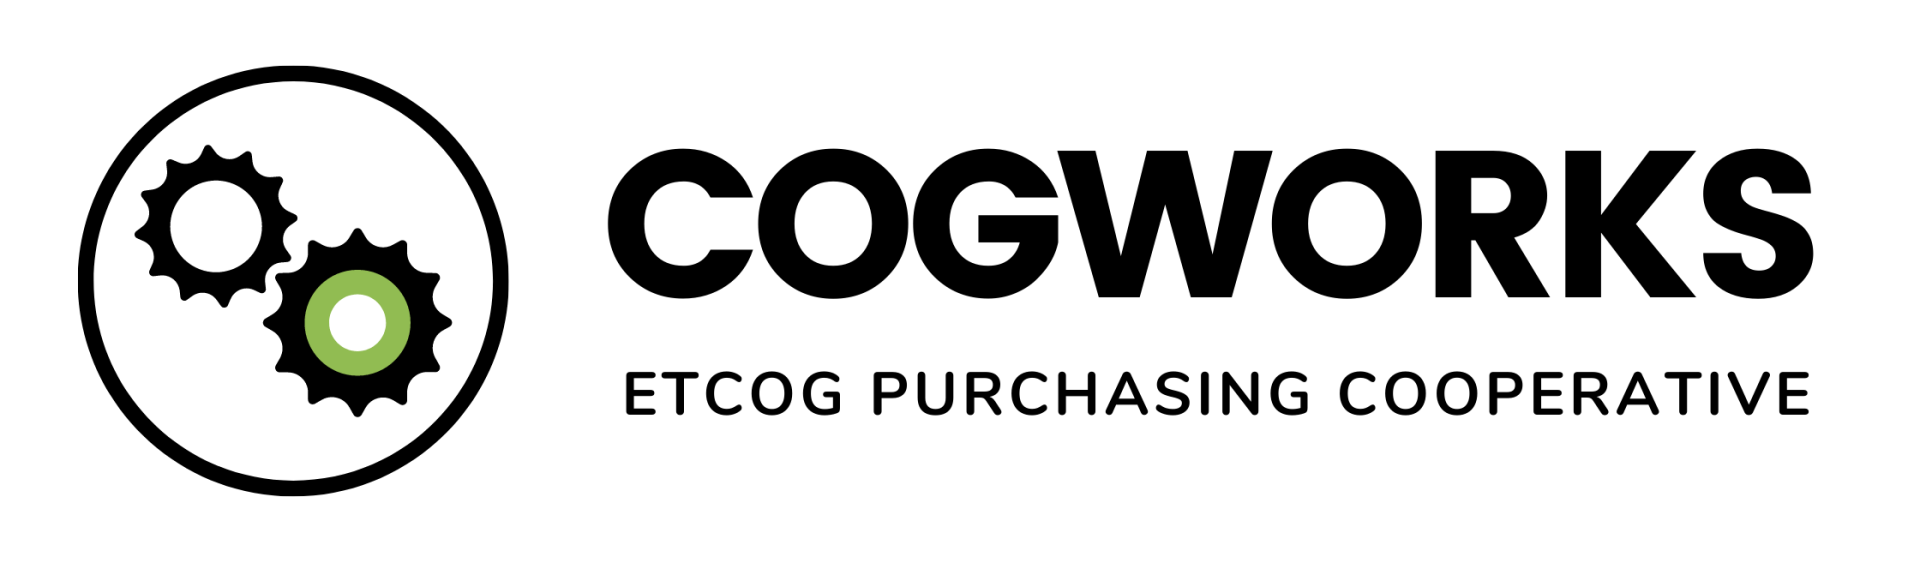 A logo for cogworks is shown on a white background.